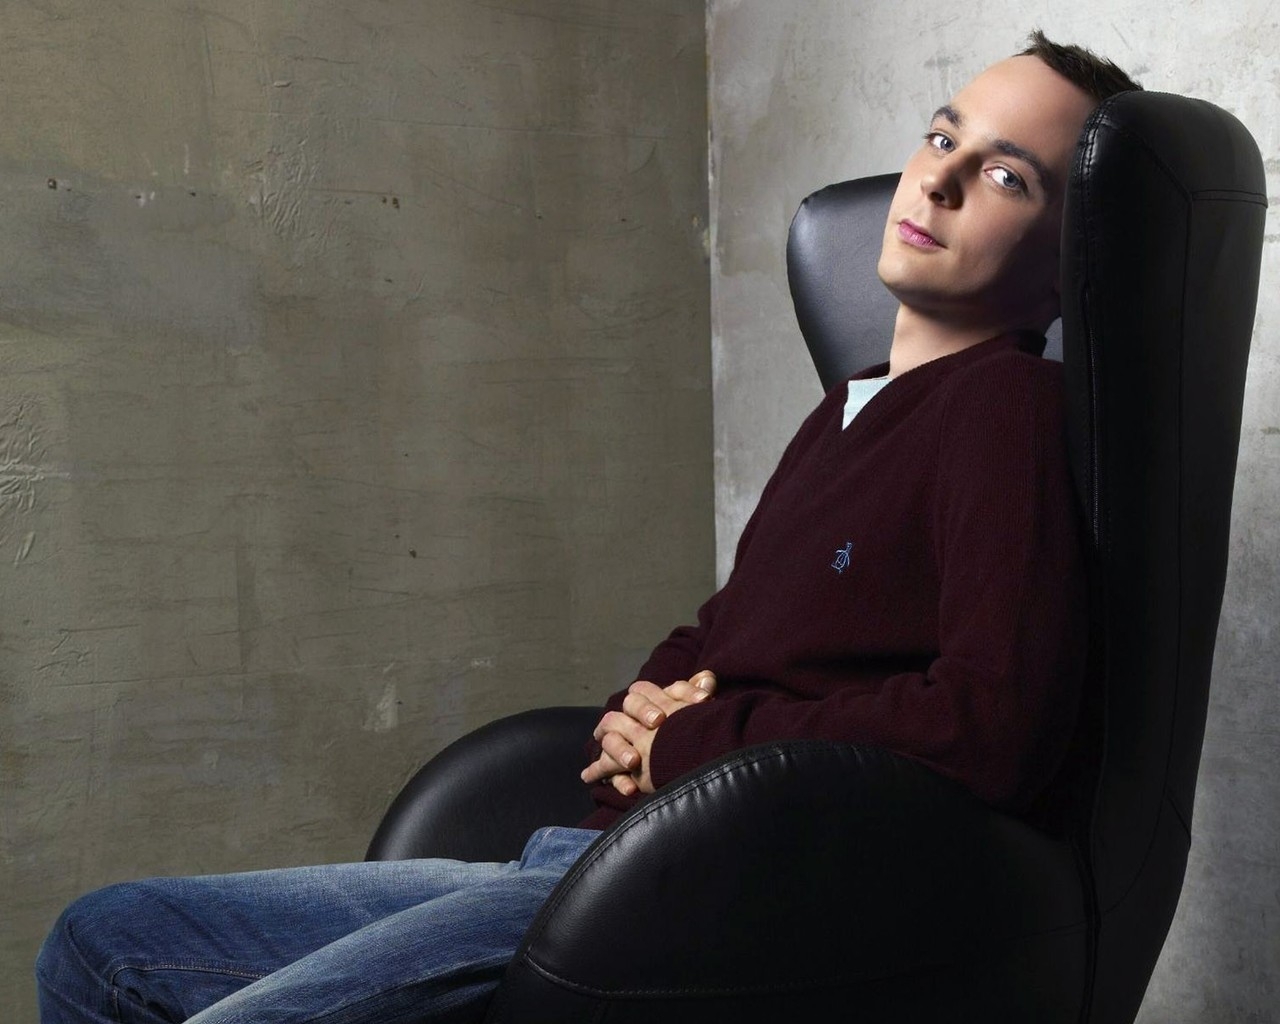 Jim Parsons for 1280 x 1024 resolution